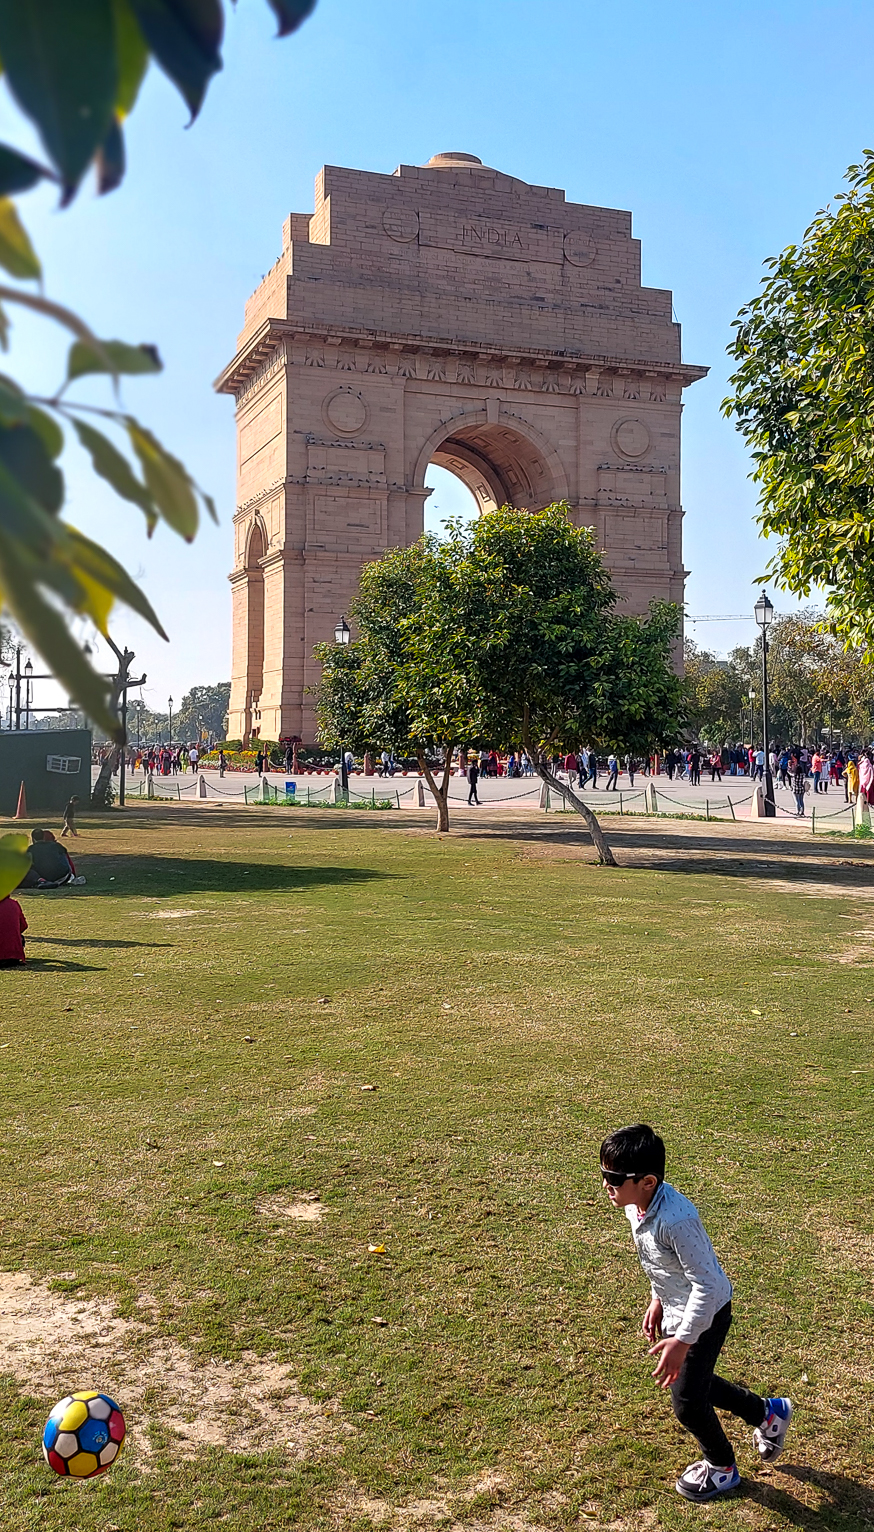 <span  class="uc_style_uc_tiles_grid_image_elementor_uc_items_attribute_title" style="color:#ffffff;">Delhi: The India Gate</span>